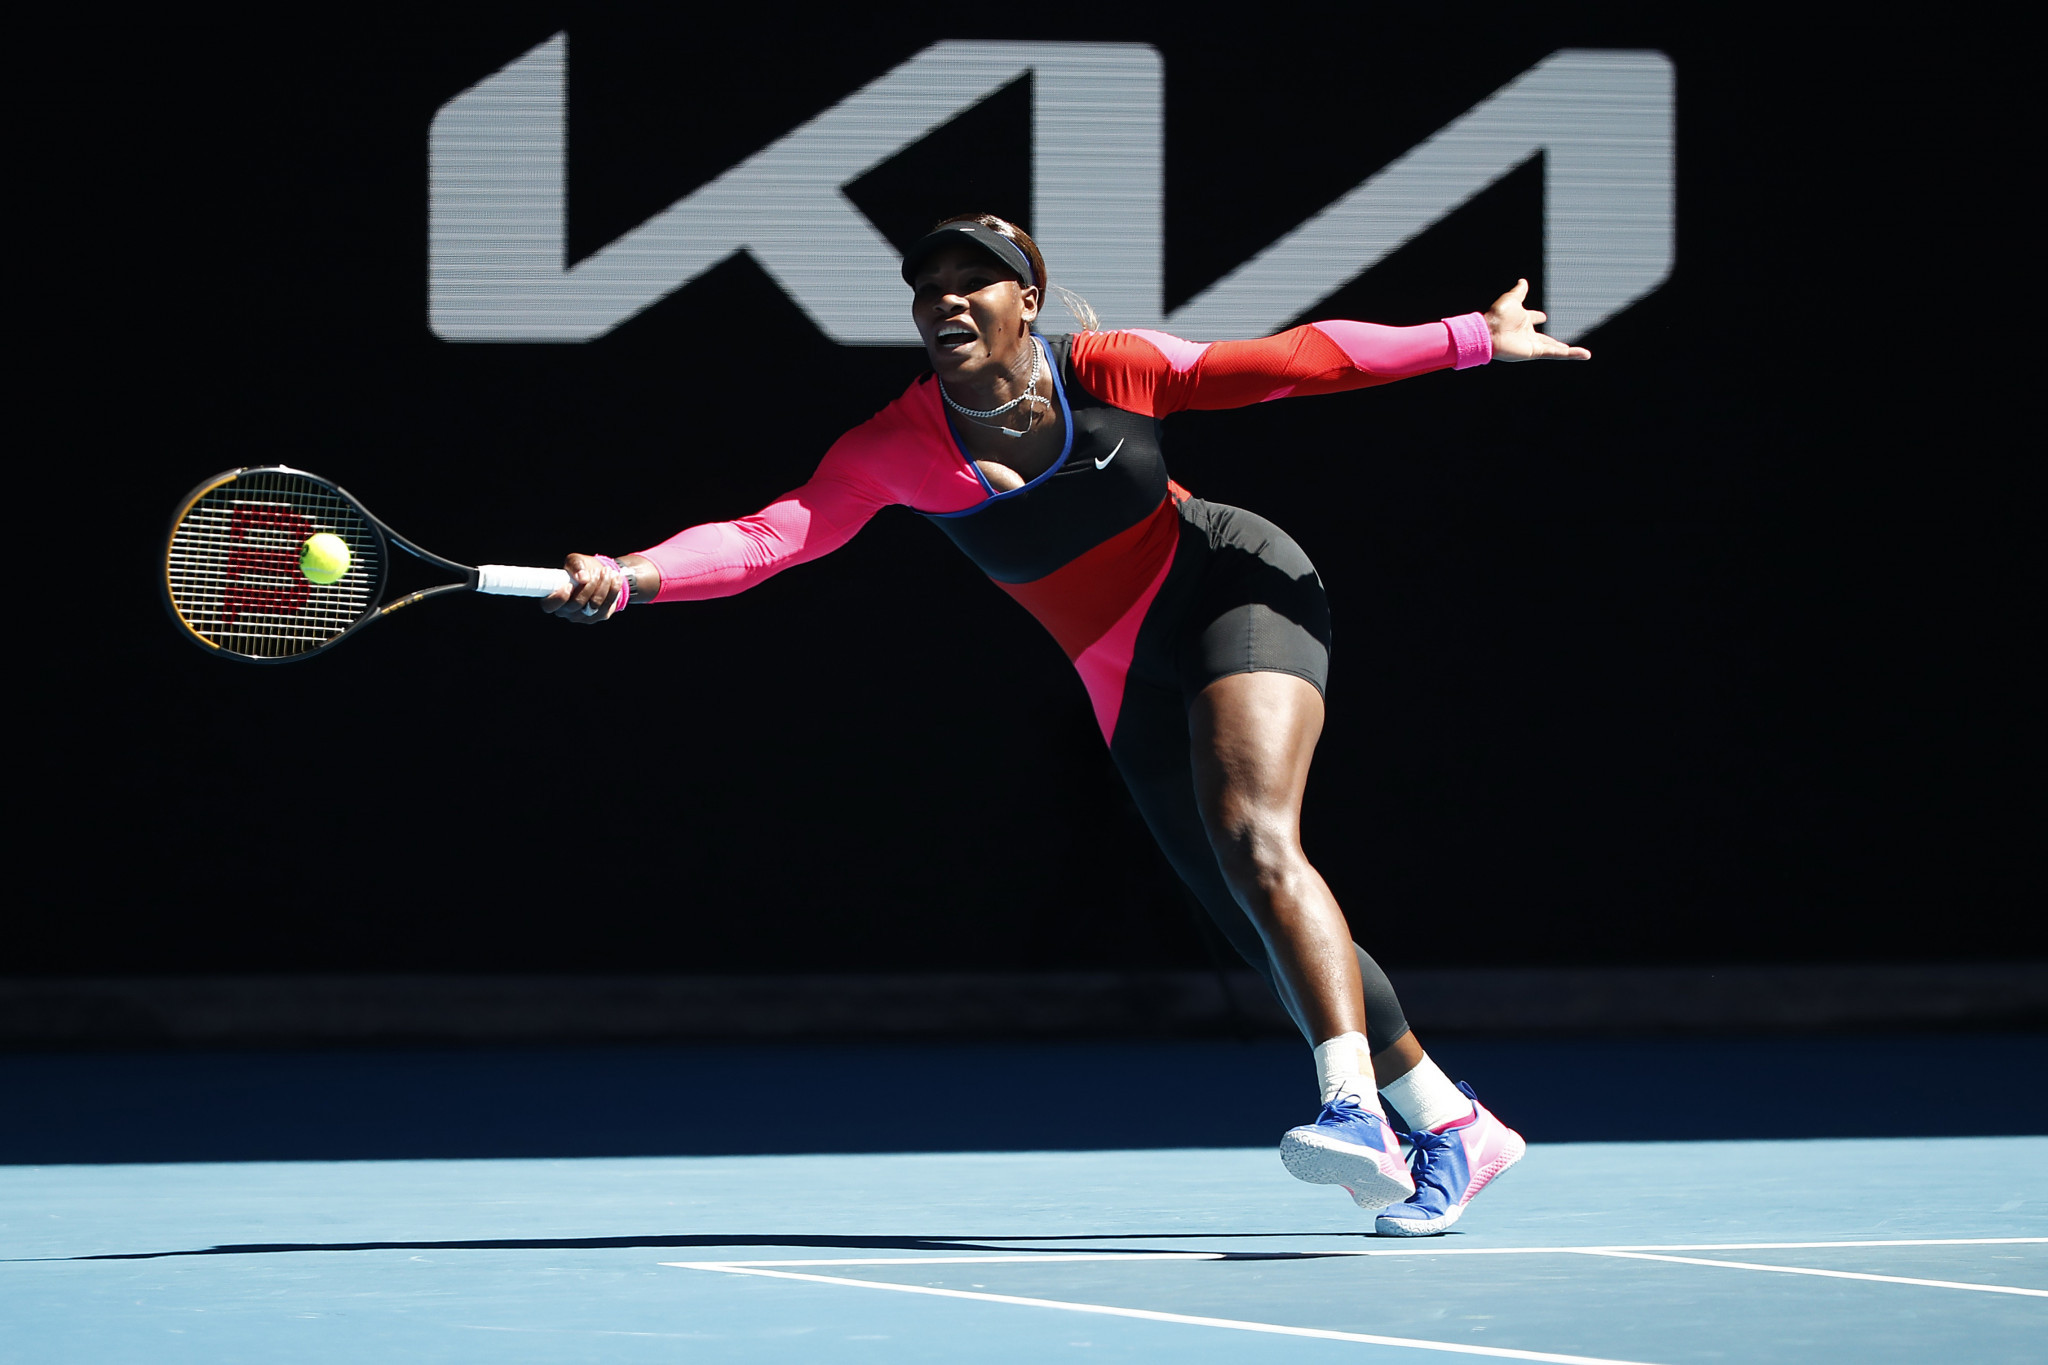 Serena Williams, a seven-time winner of the women's singles title at the Australian Open, has confirmed that she will not be travelling to Melbourne for the first Grand Slam of the year ©Getty Images